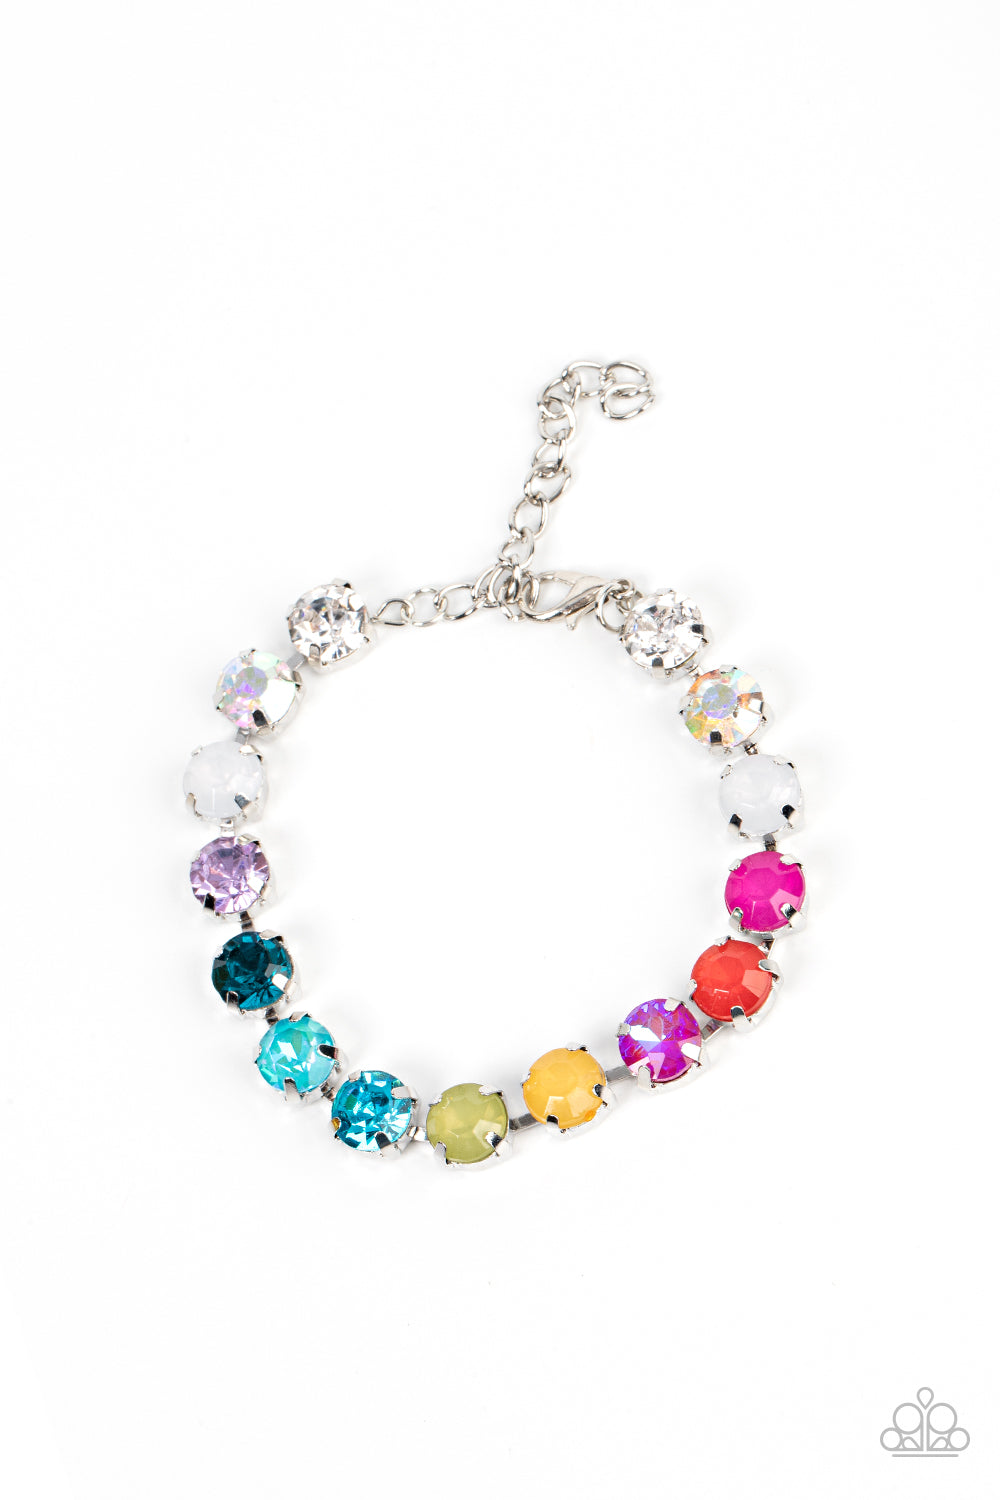 Encased in classic silver pronged fittings, an oversized display of dewy, iridescent, and classic multicolored rhinestones delicately links around the wrist for a dreamy dazzle. Features an adjustable clasp closure.  Sold as one individual bracelet.